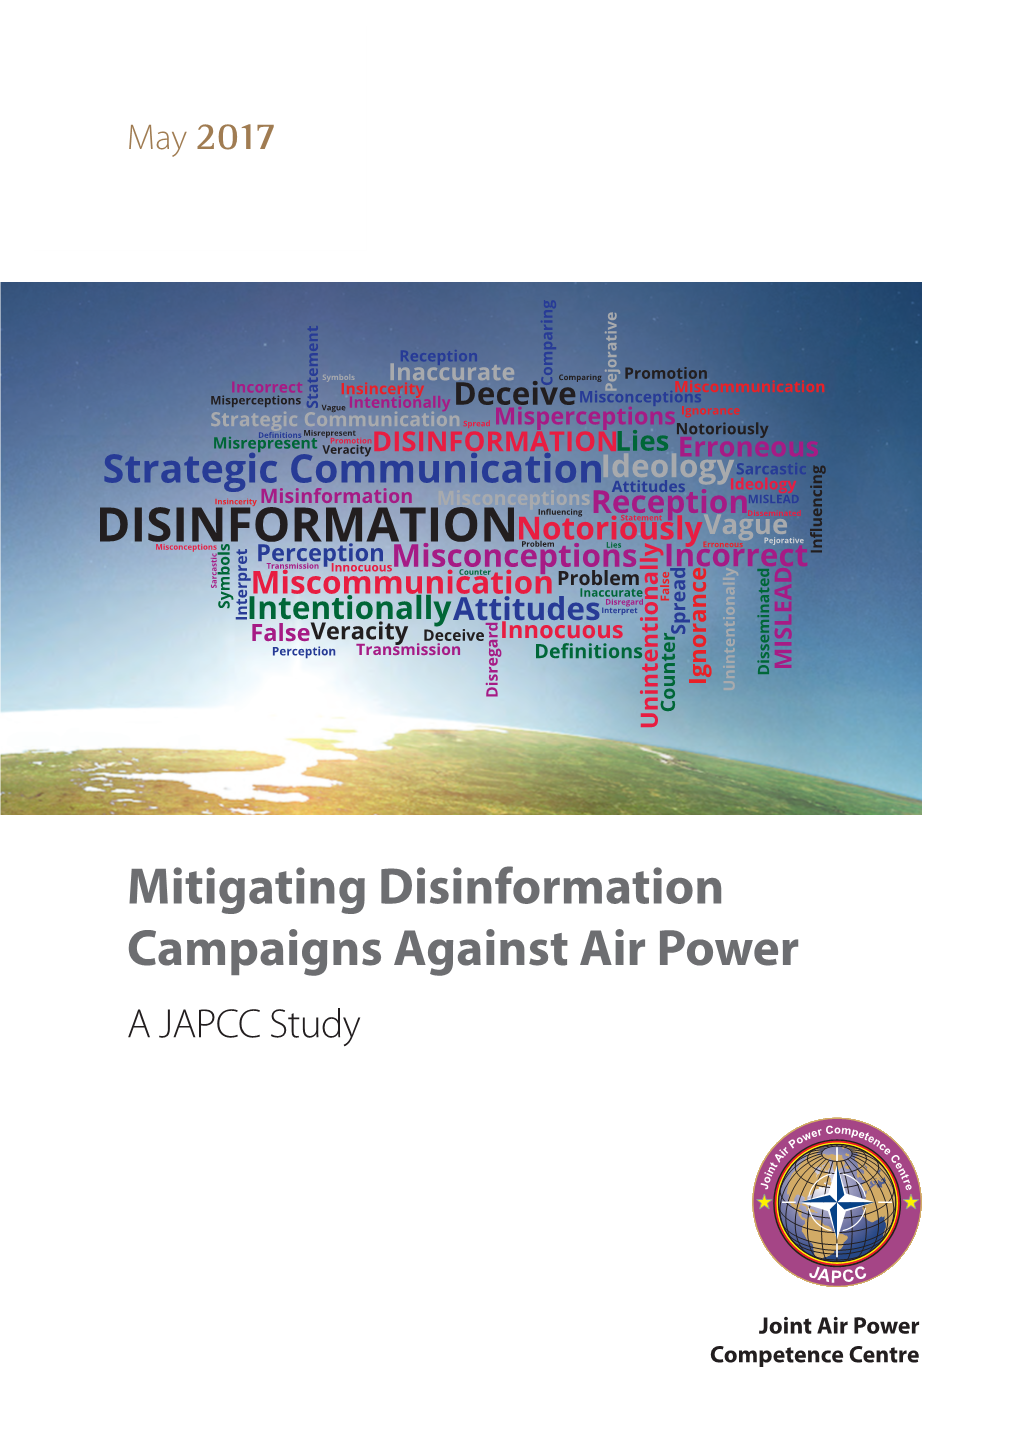 Mitigating Disinformation Campaigns Against Air Power